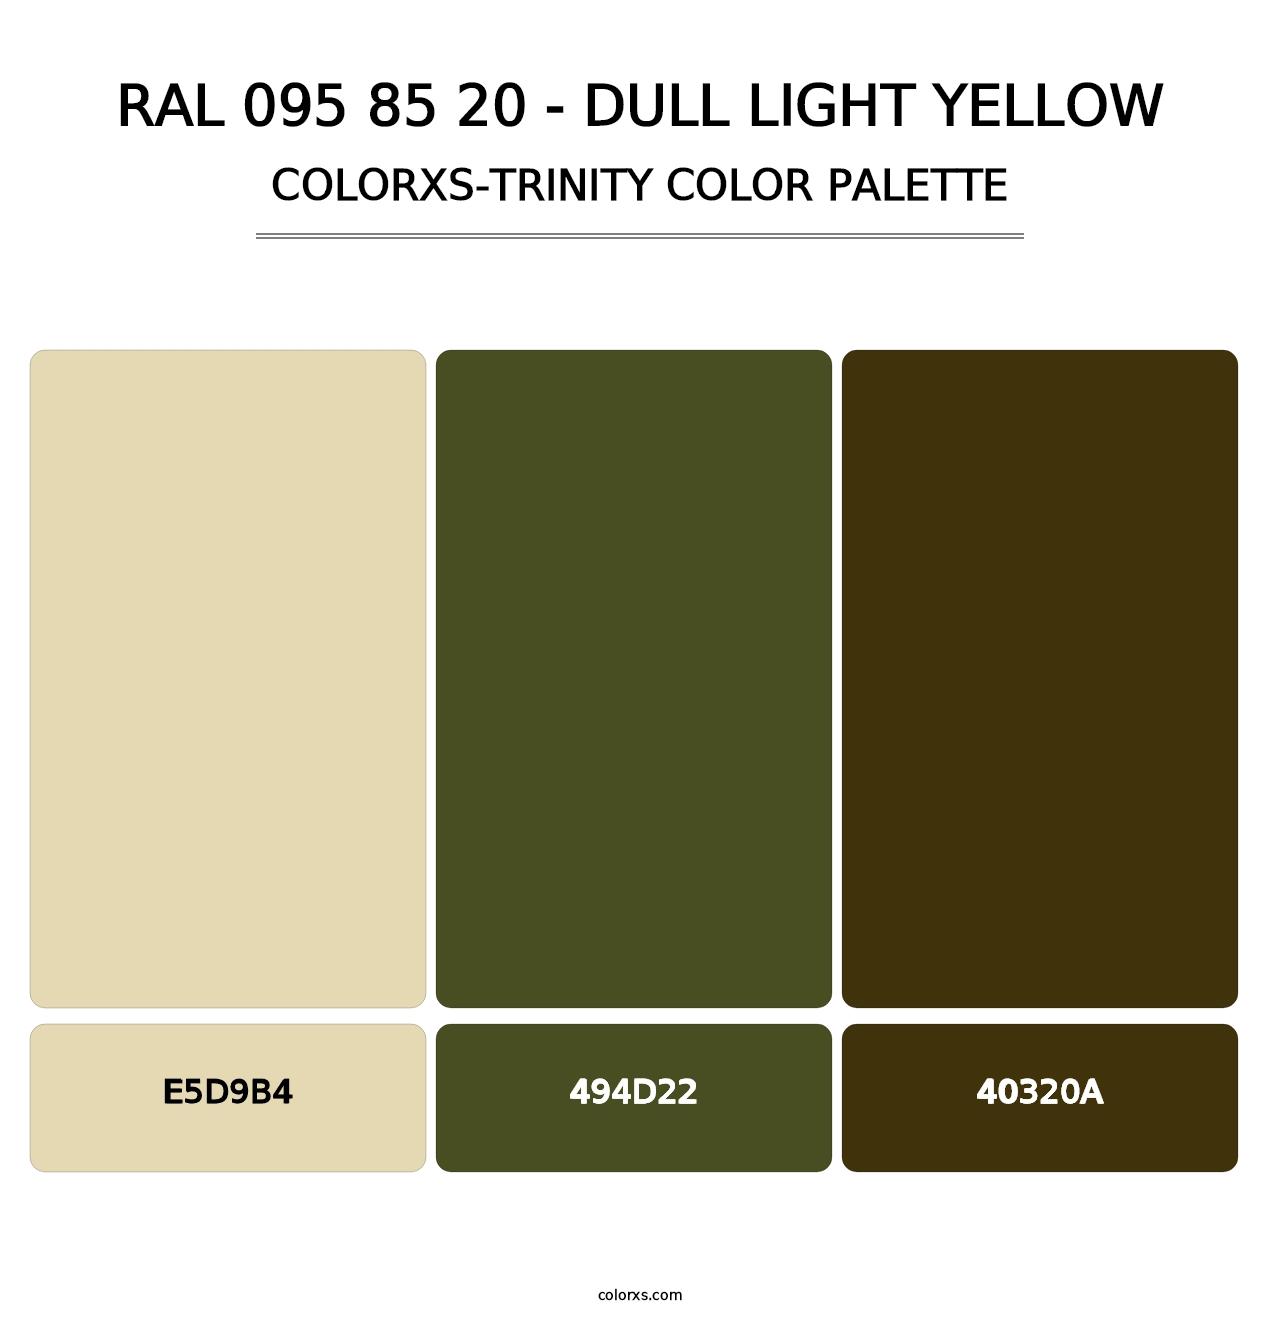 RAL 095 85 20 - Dull Light Yellow - Colorxs Trinity Palette